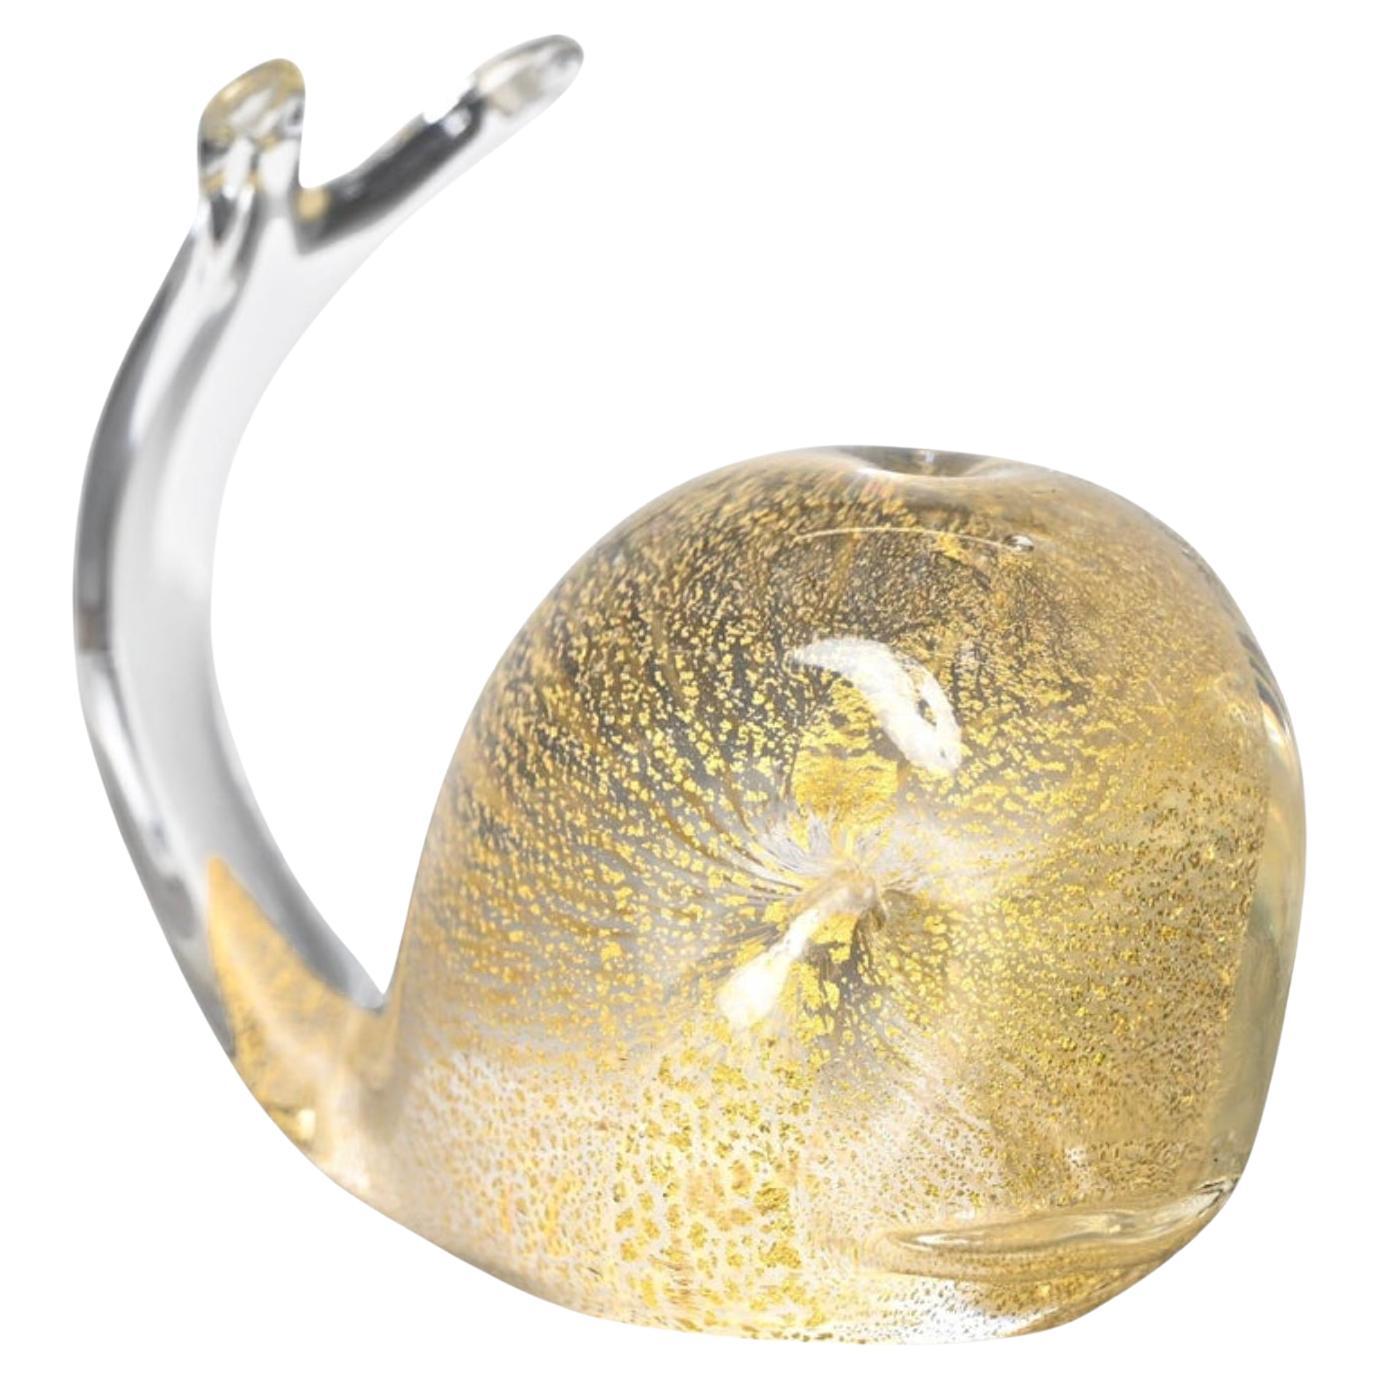 A. Seguso Whale Sculpture in Murano Glass with Gold Dust, Italy 1960s For Sale 5